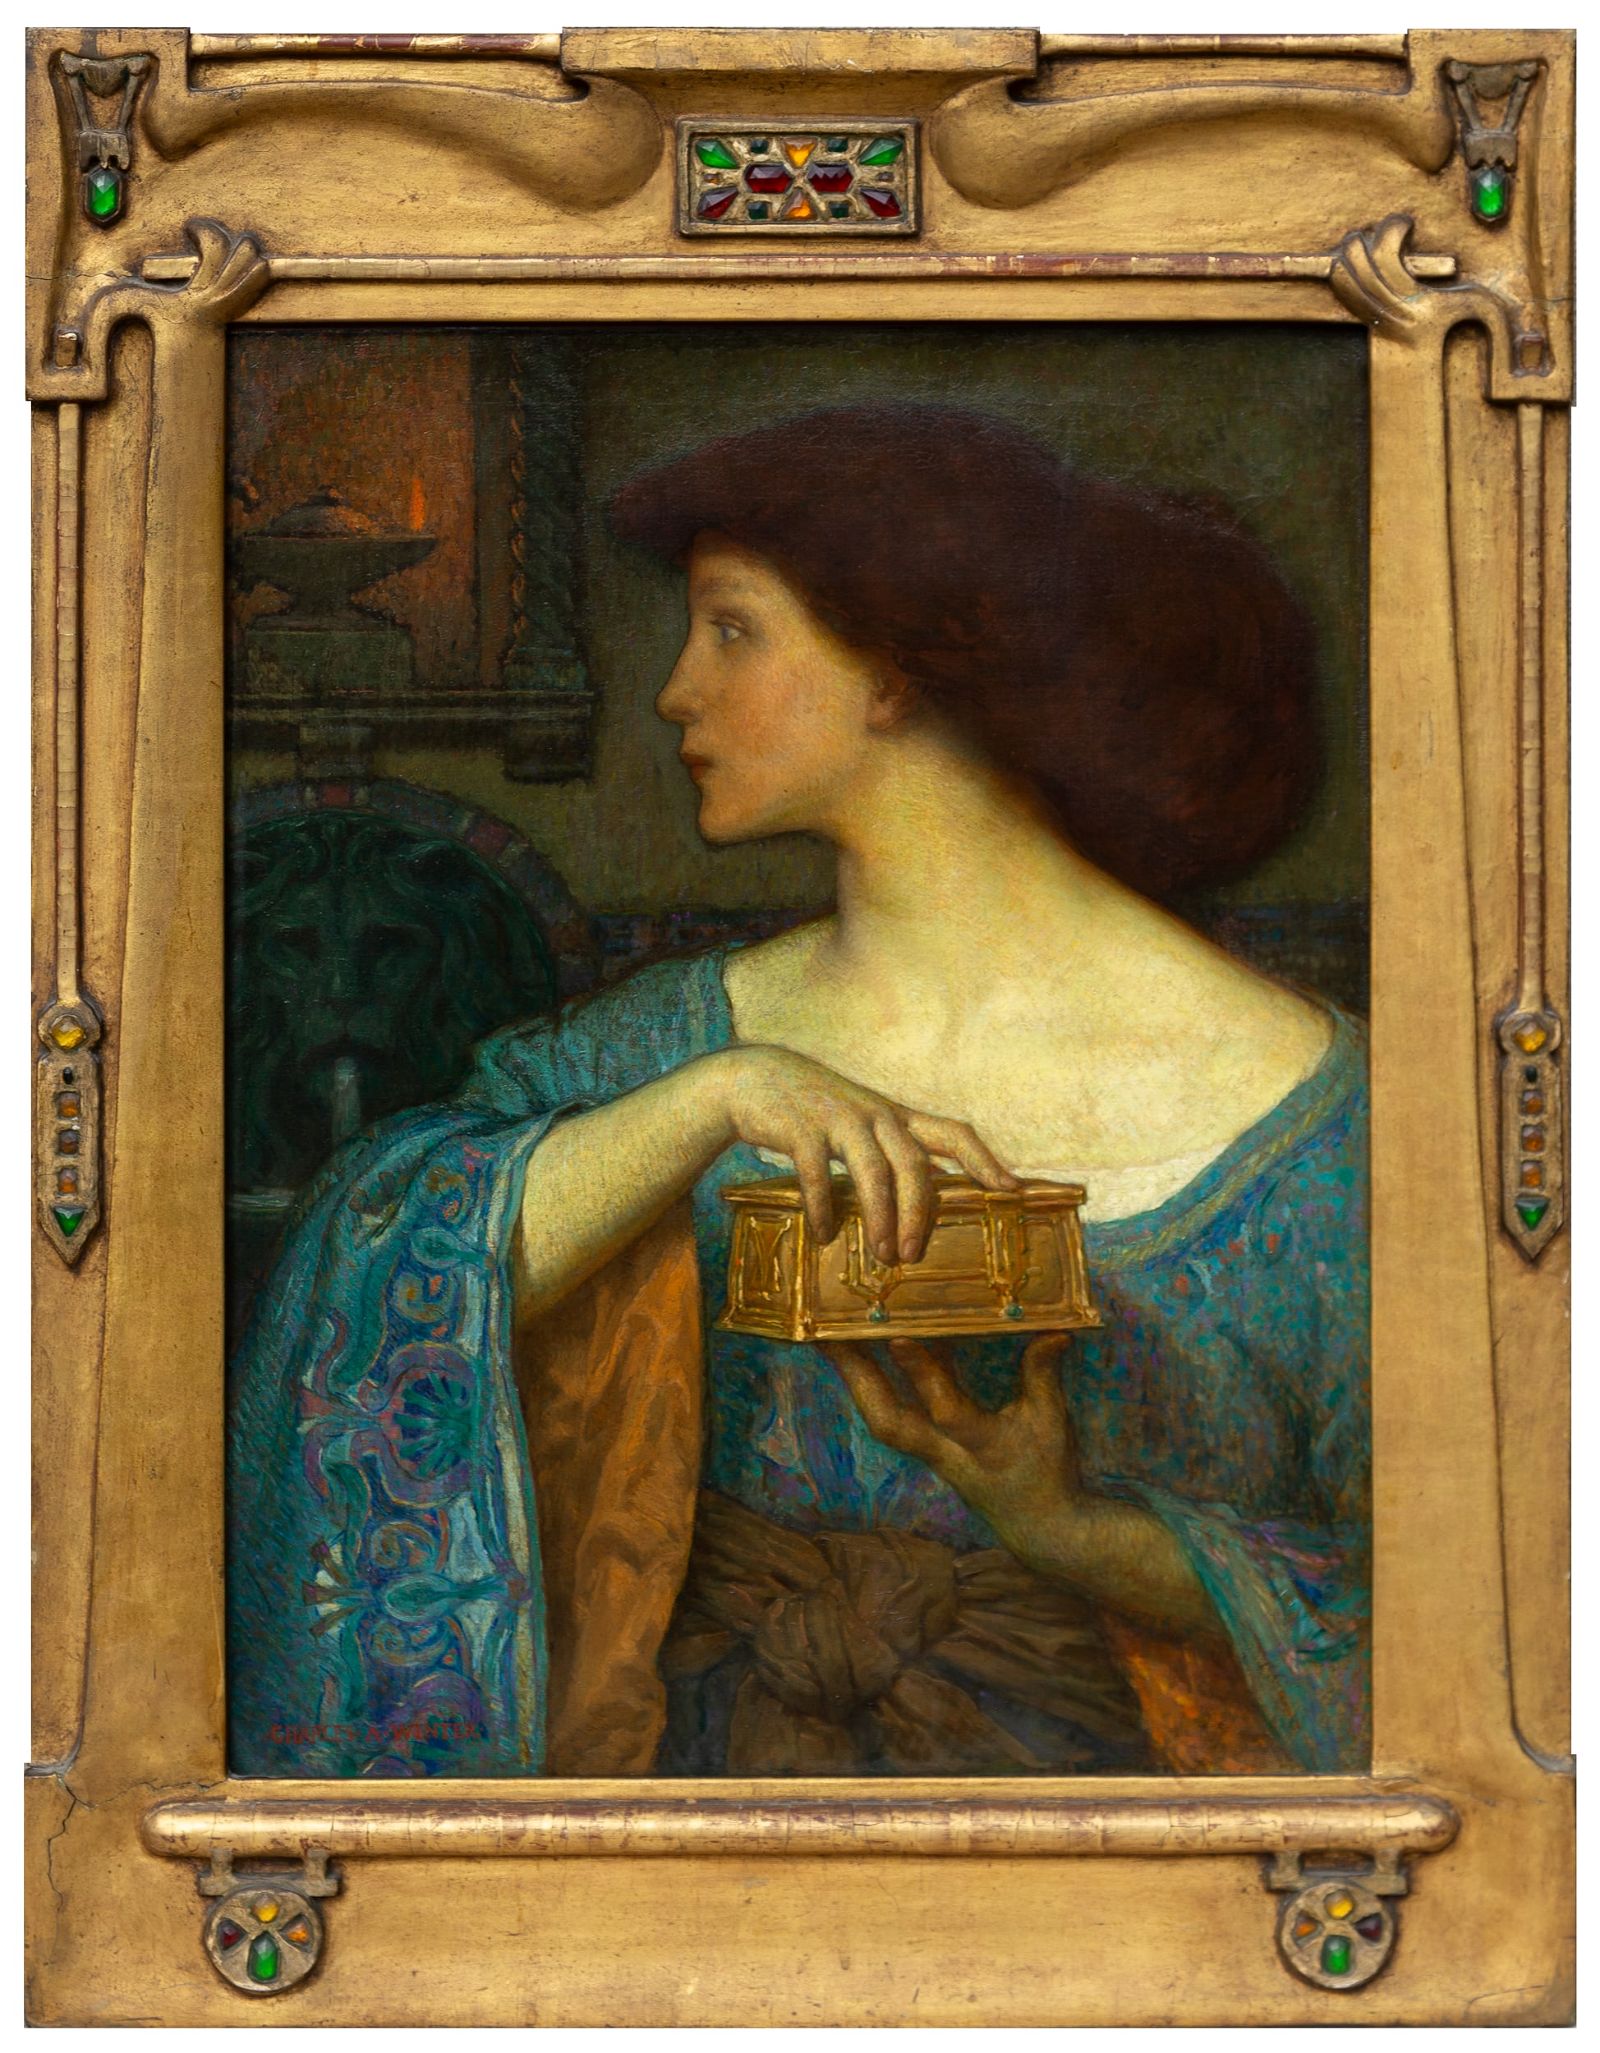 Charles Allan Winter, 'Pandora,' which sold for $95,000 ($118,750 with buyer’s premium) at Cottone Auctions.